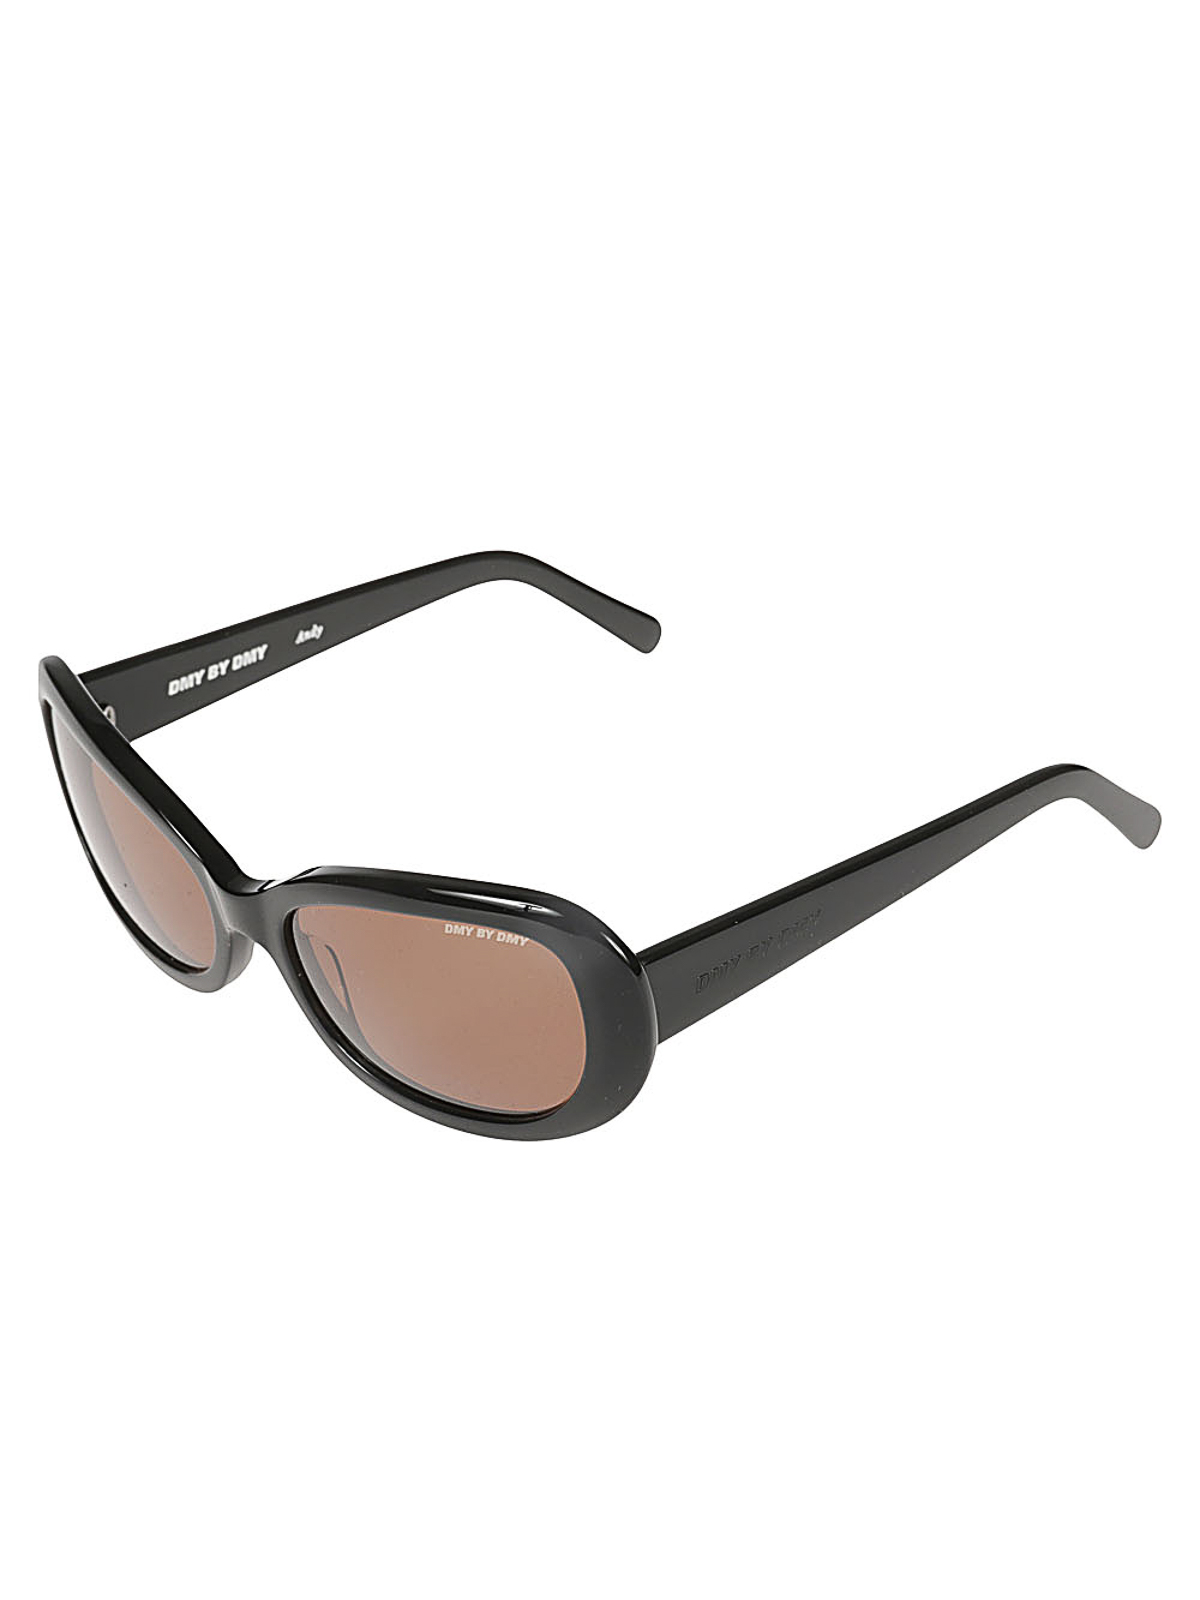 Shop Dmy By Dmy Andy Sunglasses In Black